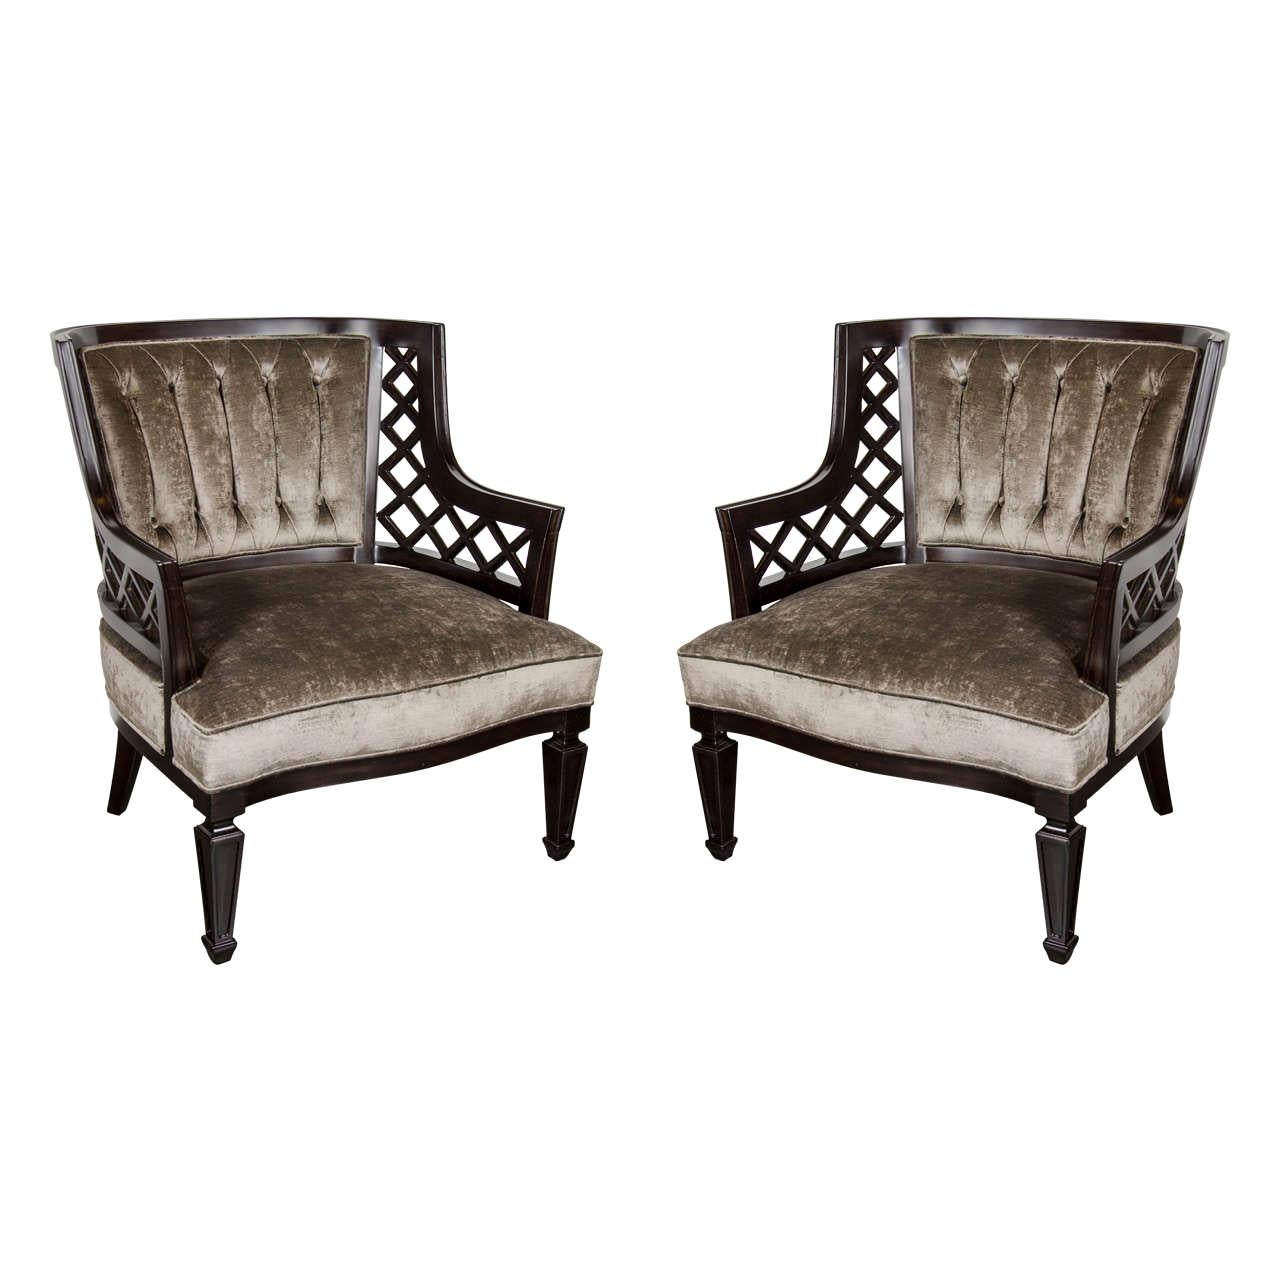 Pair of Hollywood Ebonized Walnut Lattice Occasional Chairs by Grosfeld House For Sale